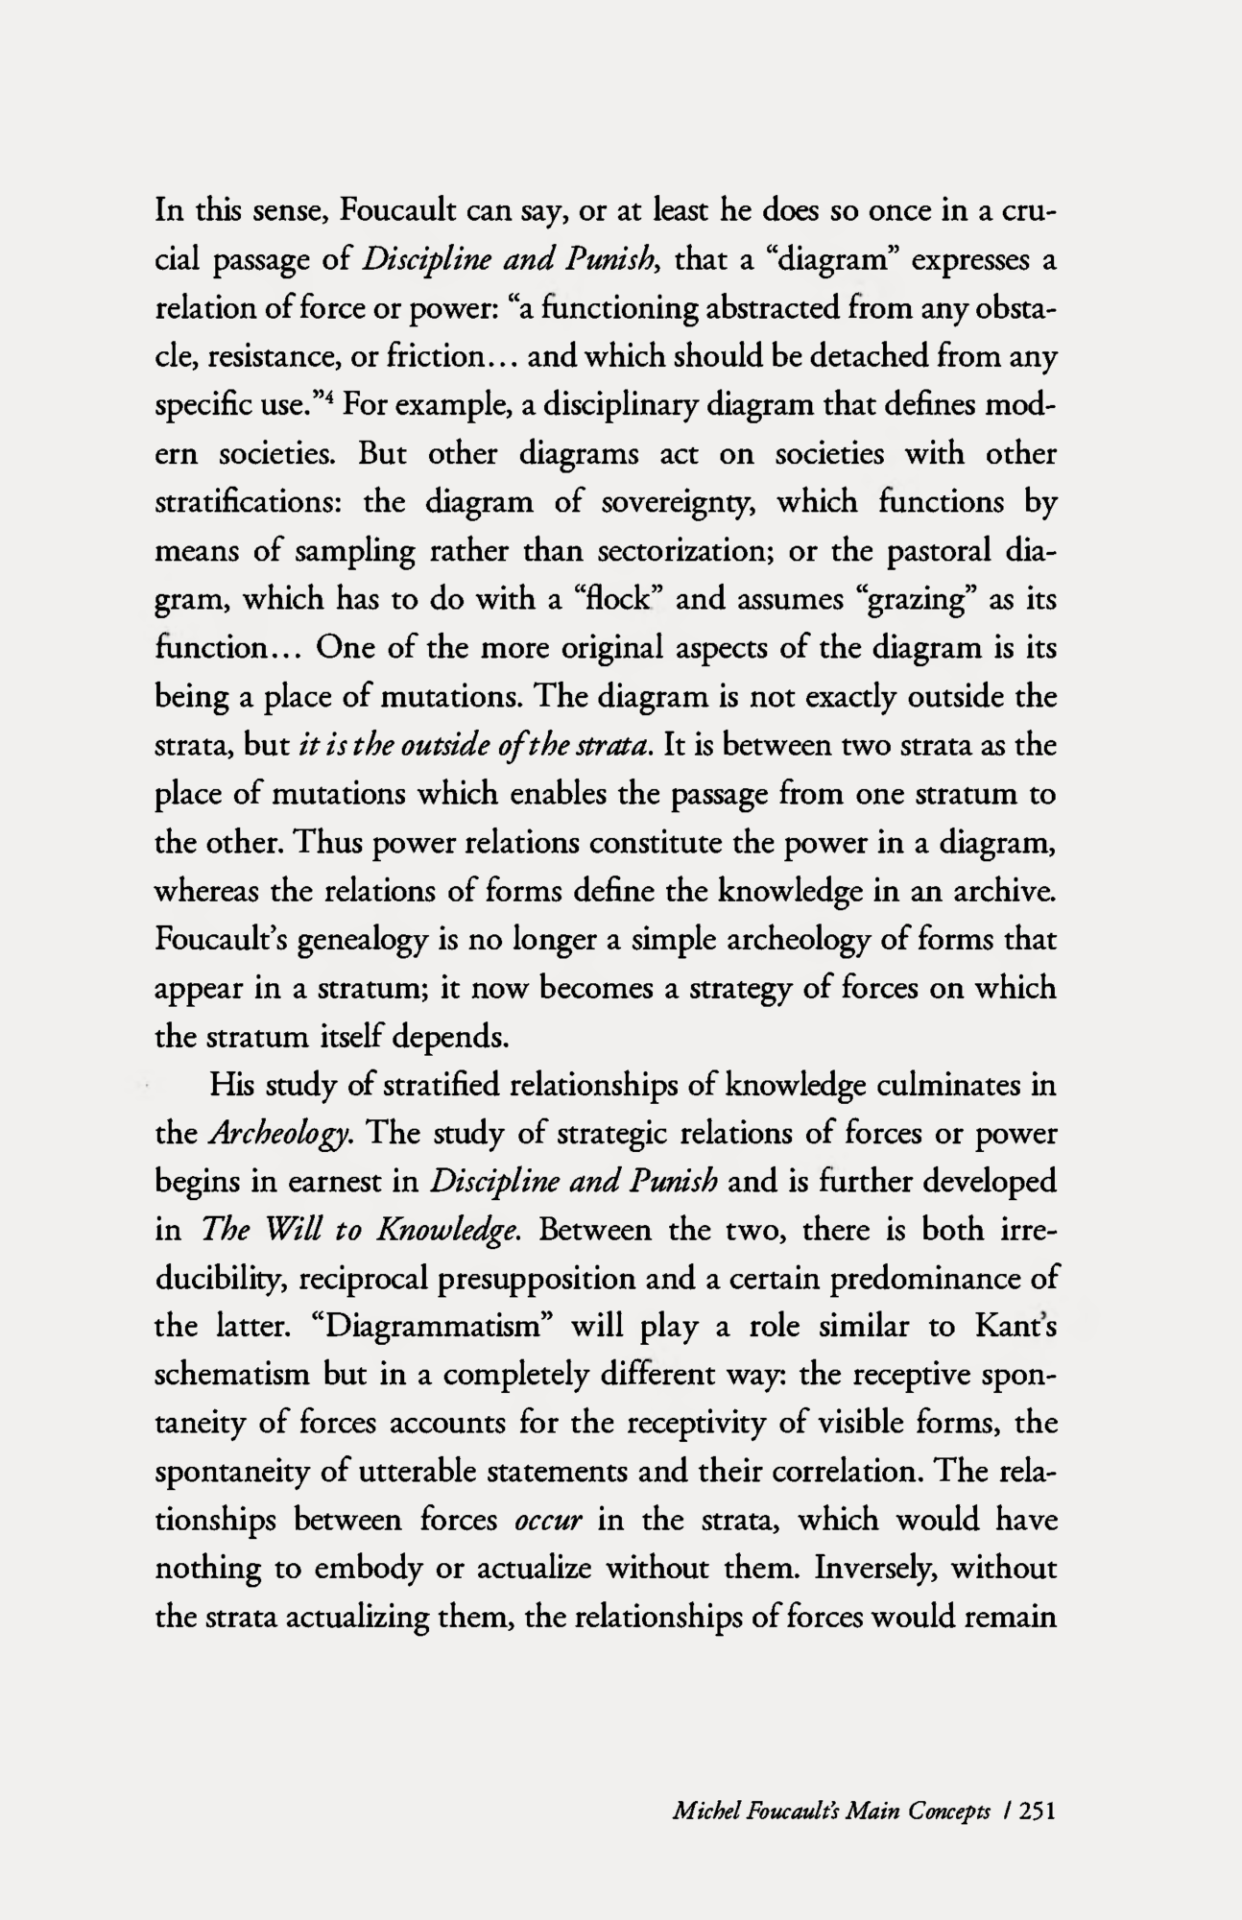 Gilles Deleuze, Michel Foucault’s Main Concepts, in Two Regimes of  Madness. Texts and Interviews 1975-1995, Edited by David Lapoujade,  Translated by Ames Hodges and Mike Taormina, Semiotext(e), Columbia  University, New York, NY, 2006, pp. 241-260 (pt. 2) (pt. 1 here)Note
«Written after the death of Foucault in 1984, this article appears to be a first version of what would later become ‘Foucault‘.  The type-written manuscript has editorial corrections, suggesting  Deleuzes intention to publish it. The course Deleuze gave at  Saint-Denis in 1985-1986, as well as the text he was working on at that  time, finally discouraged him from publishing this article. The first  few paragraphs show up in ‘Foucault’, though with substantial  additions (cf. the chapter on strata, pp. 55-75). The rest of the  article was left aside, except for a few passages here and there.» – p.  406 #graphic design#philosophy#book#gilles deleuze#michel foucault#david lapoujade#ames hodges#mike taormina#semiotext(e)#2000s